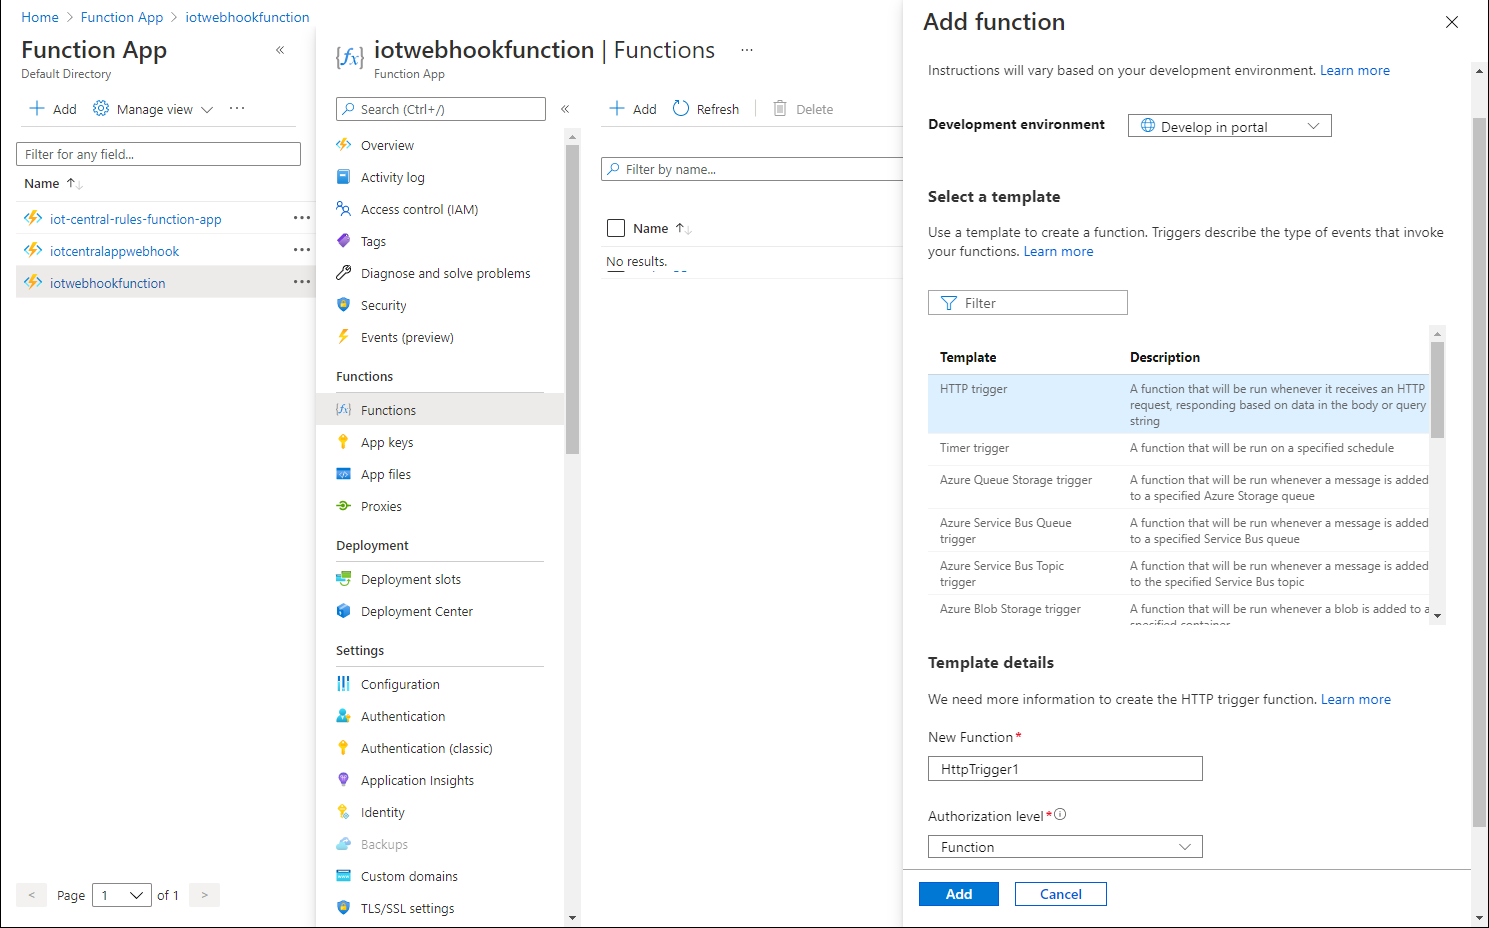 Screenshot of the 'Add function' pane of the Azure Function app in the Azure portal.